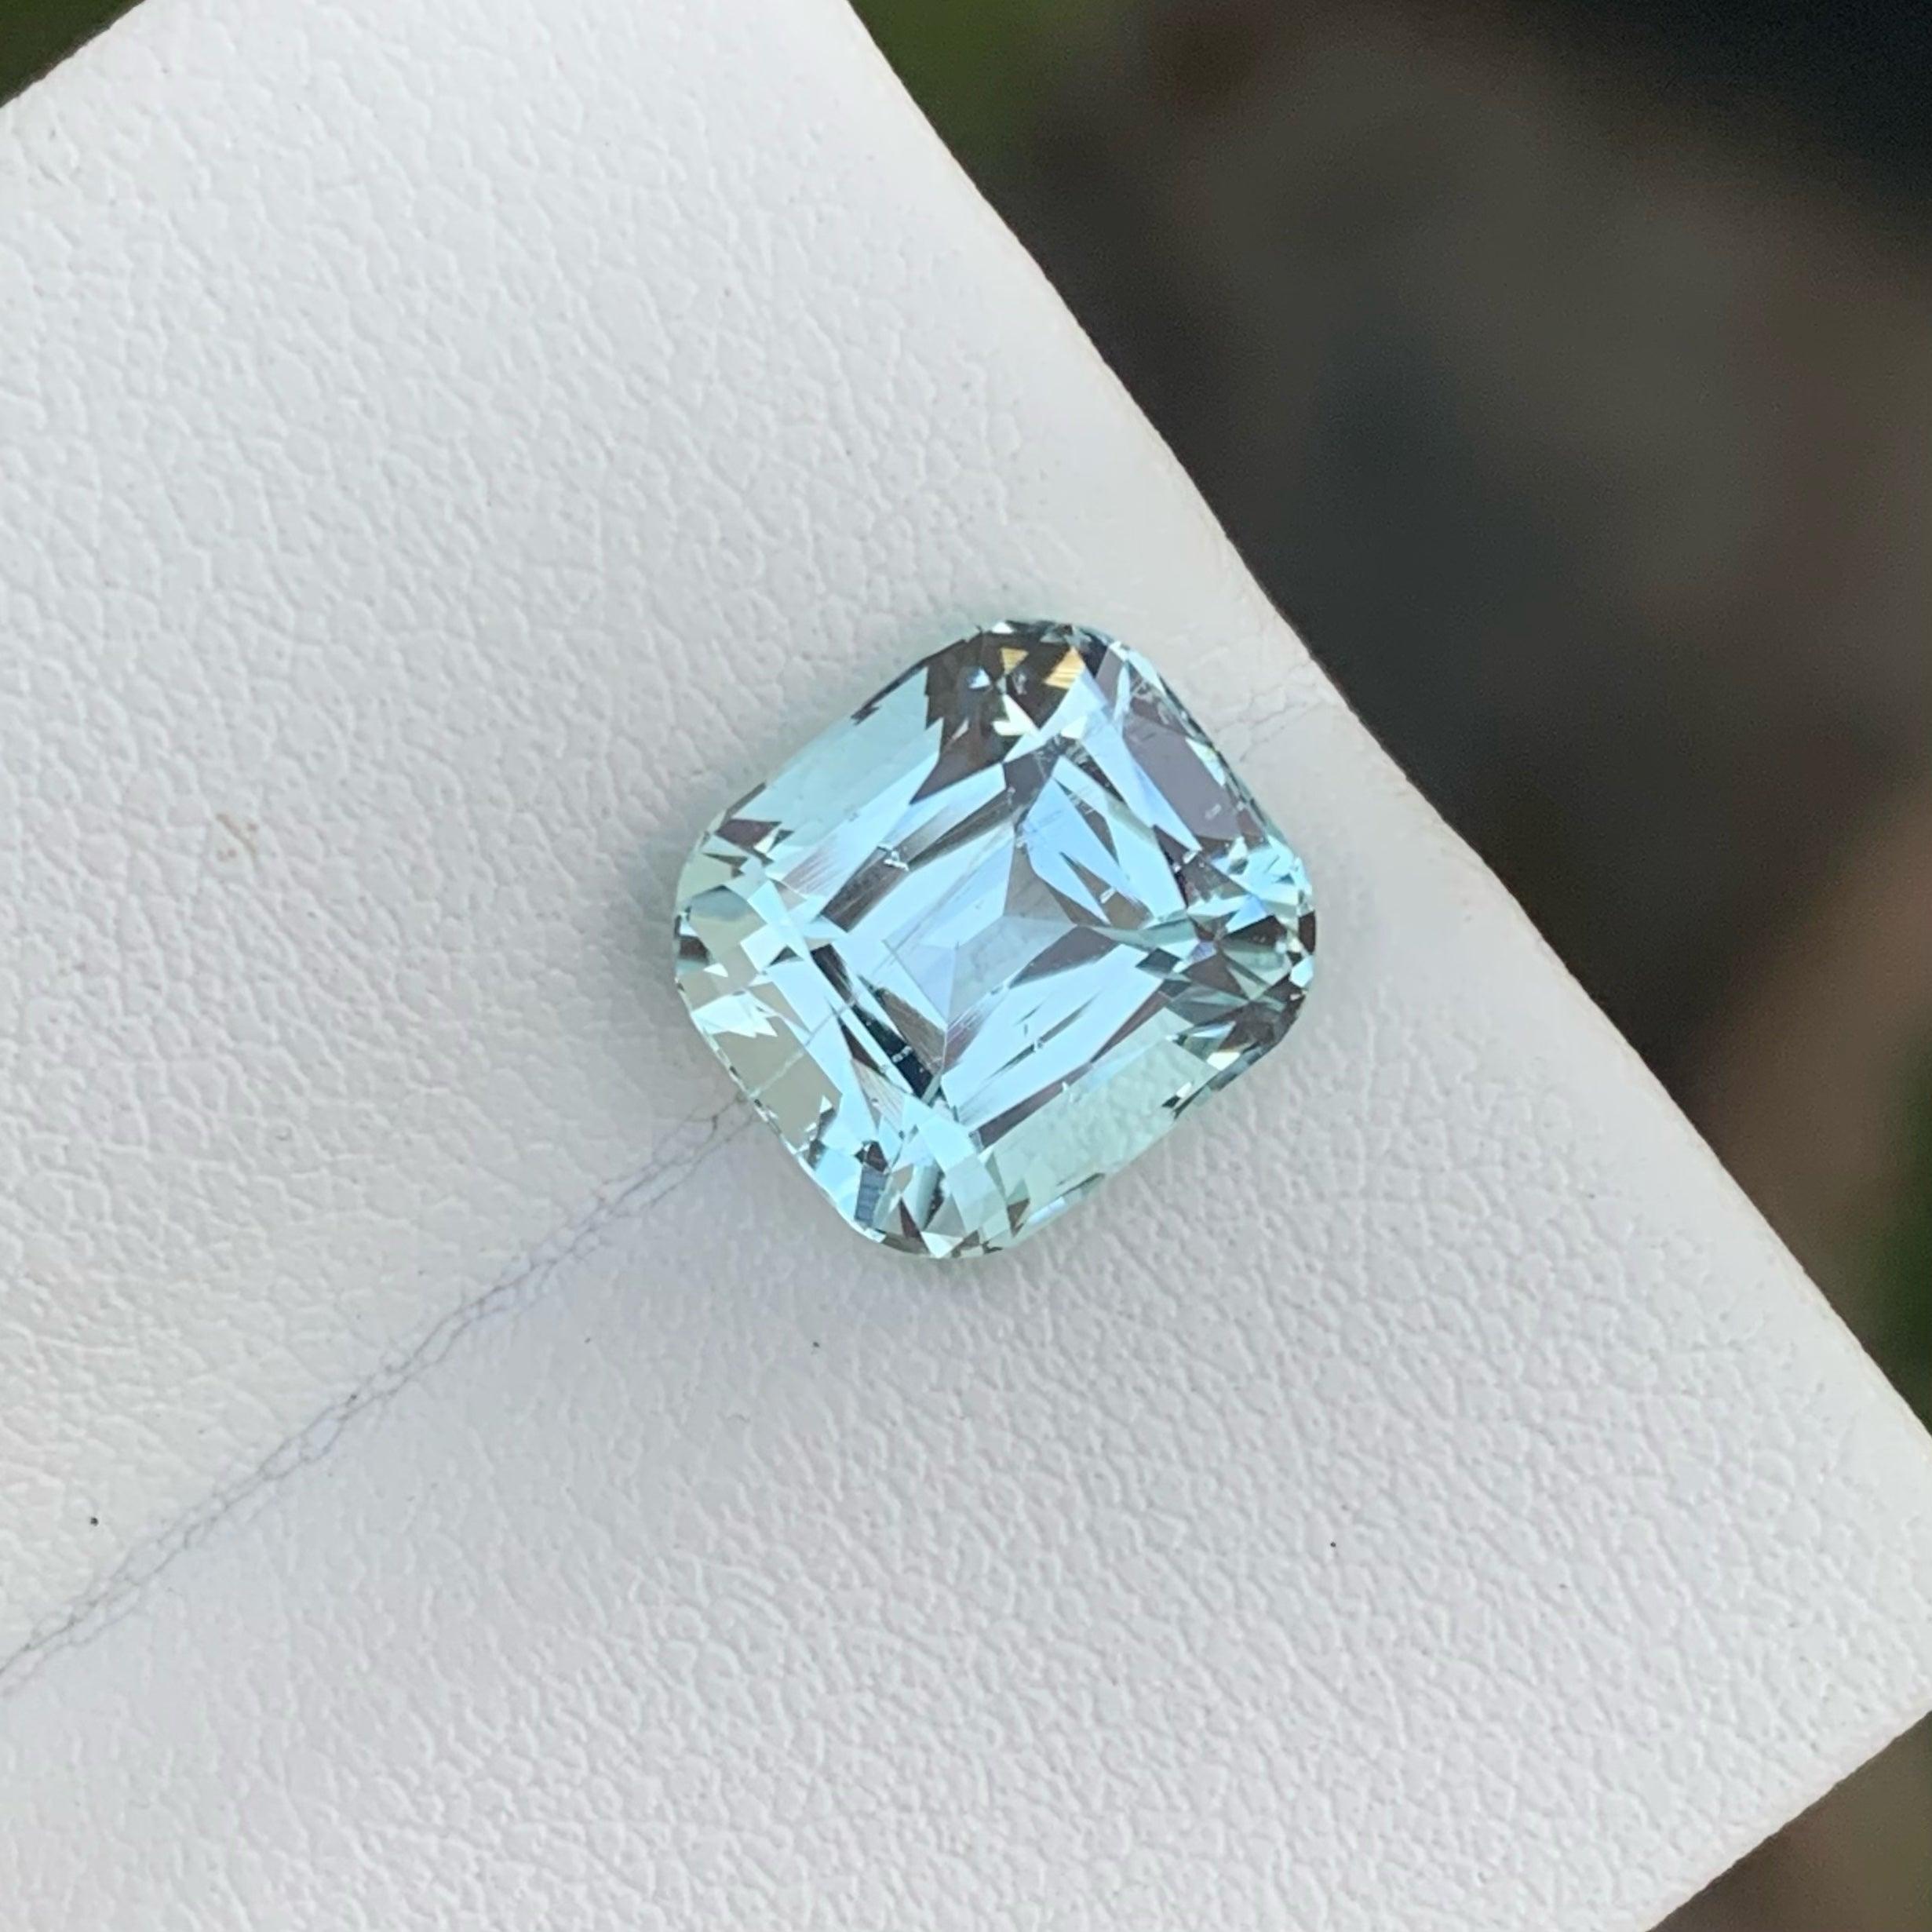 Pretty Light Blue Natural Aquamarine Stone, available for sale at wholesale price natural high quality, 3.90 Carats SI Clean Clarity Loose Aquamarine from Pakistan.

Product Information:
GEMSTONE NAME: Pretty Light Blue Natural Aquamarine